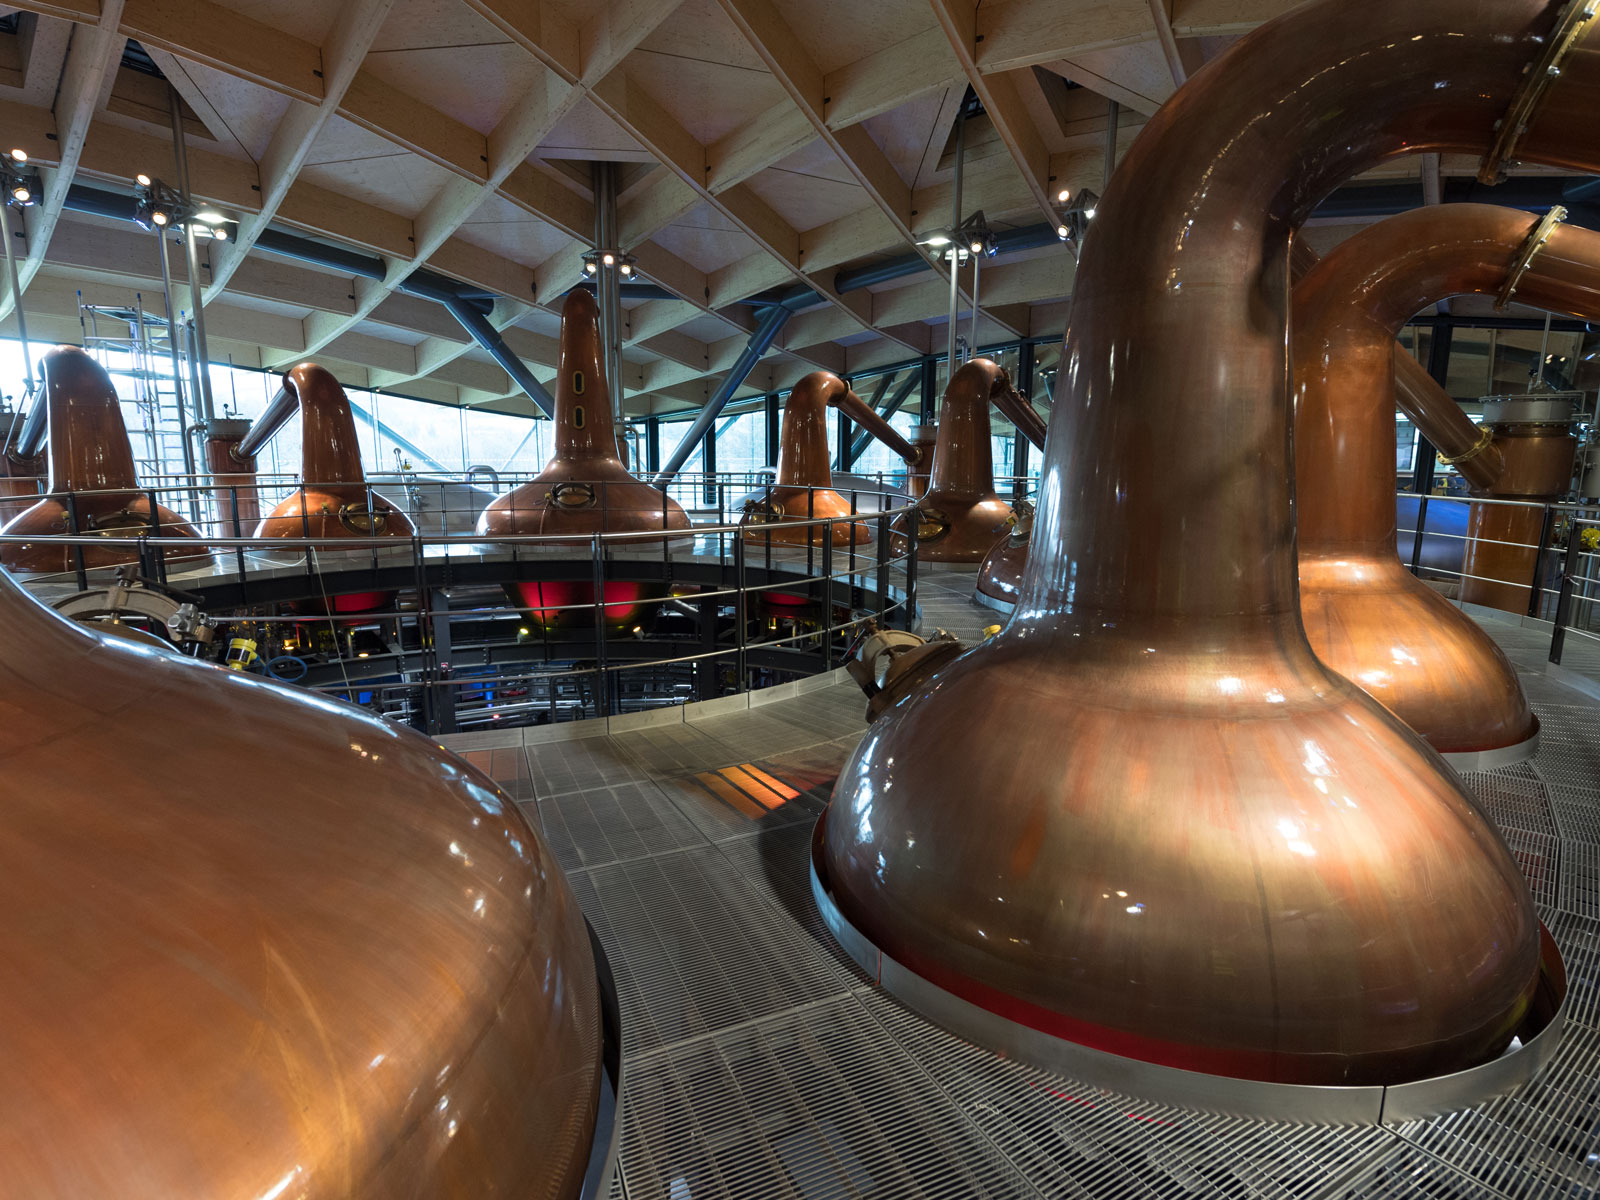 (Image of pot stills at Macallan distillery) Macallan distillery continues to use smaller stills - here at least, they're resisting the urge to scale up